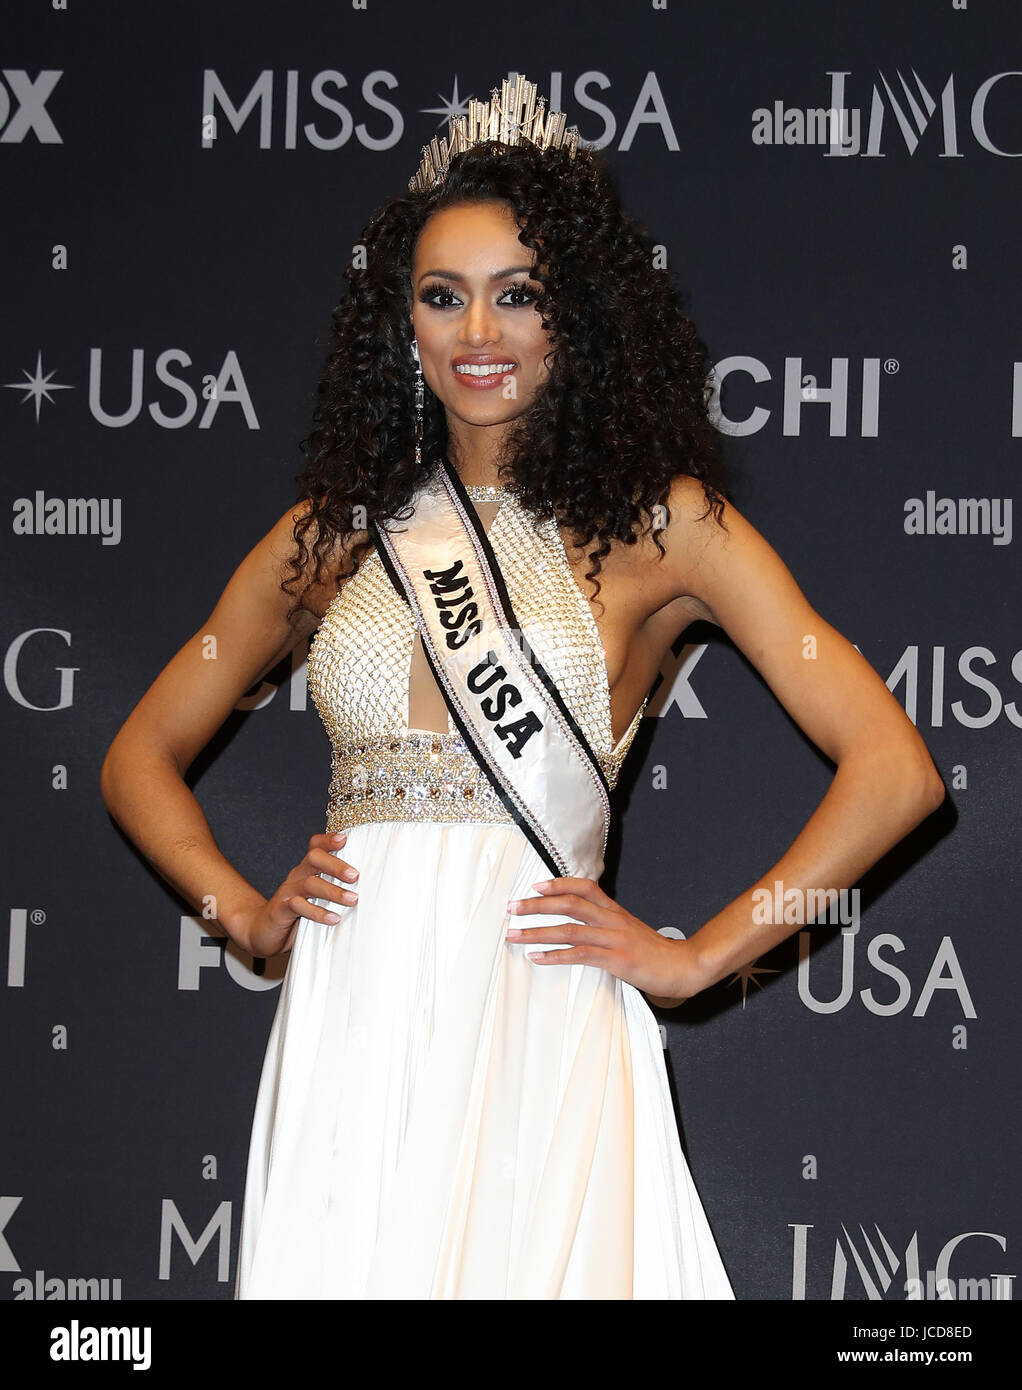 Miss columbia hi-res stock photography and images - Page 18 - Alamy